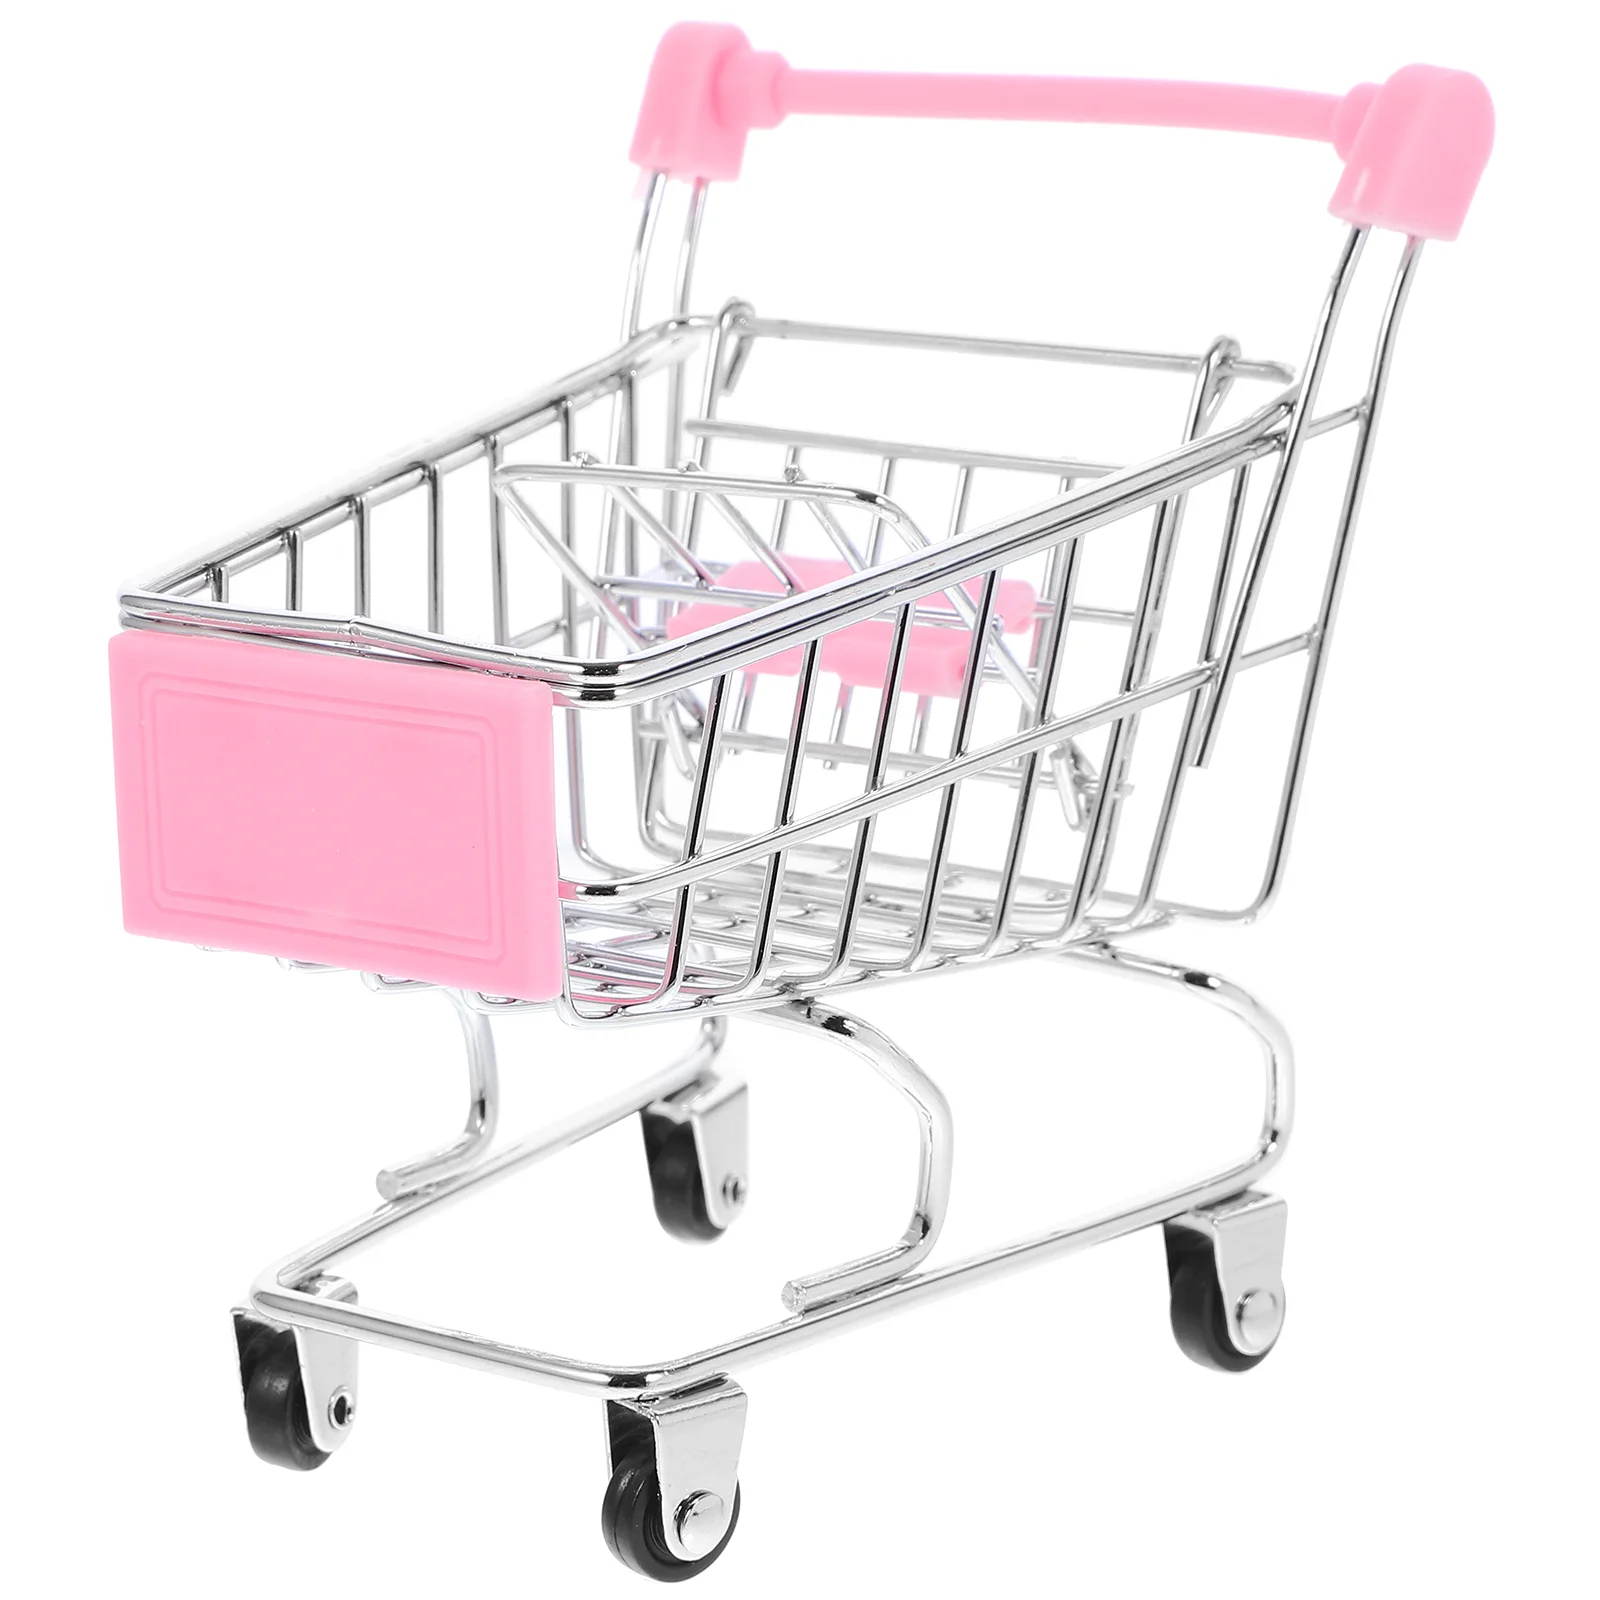 Accessory Children Toy for Pretending Game Baby Miniature Decoration Delicate Shopping Cart Trolley